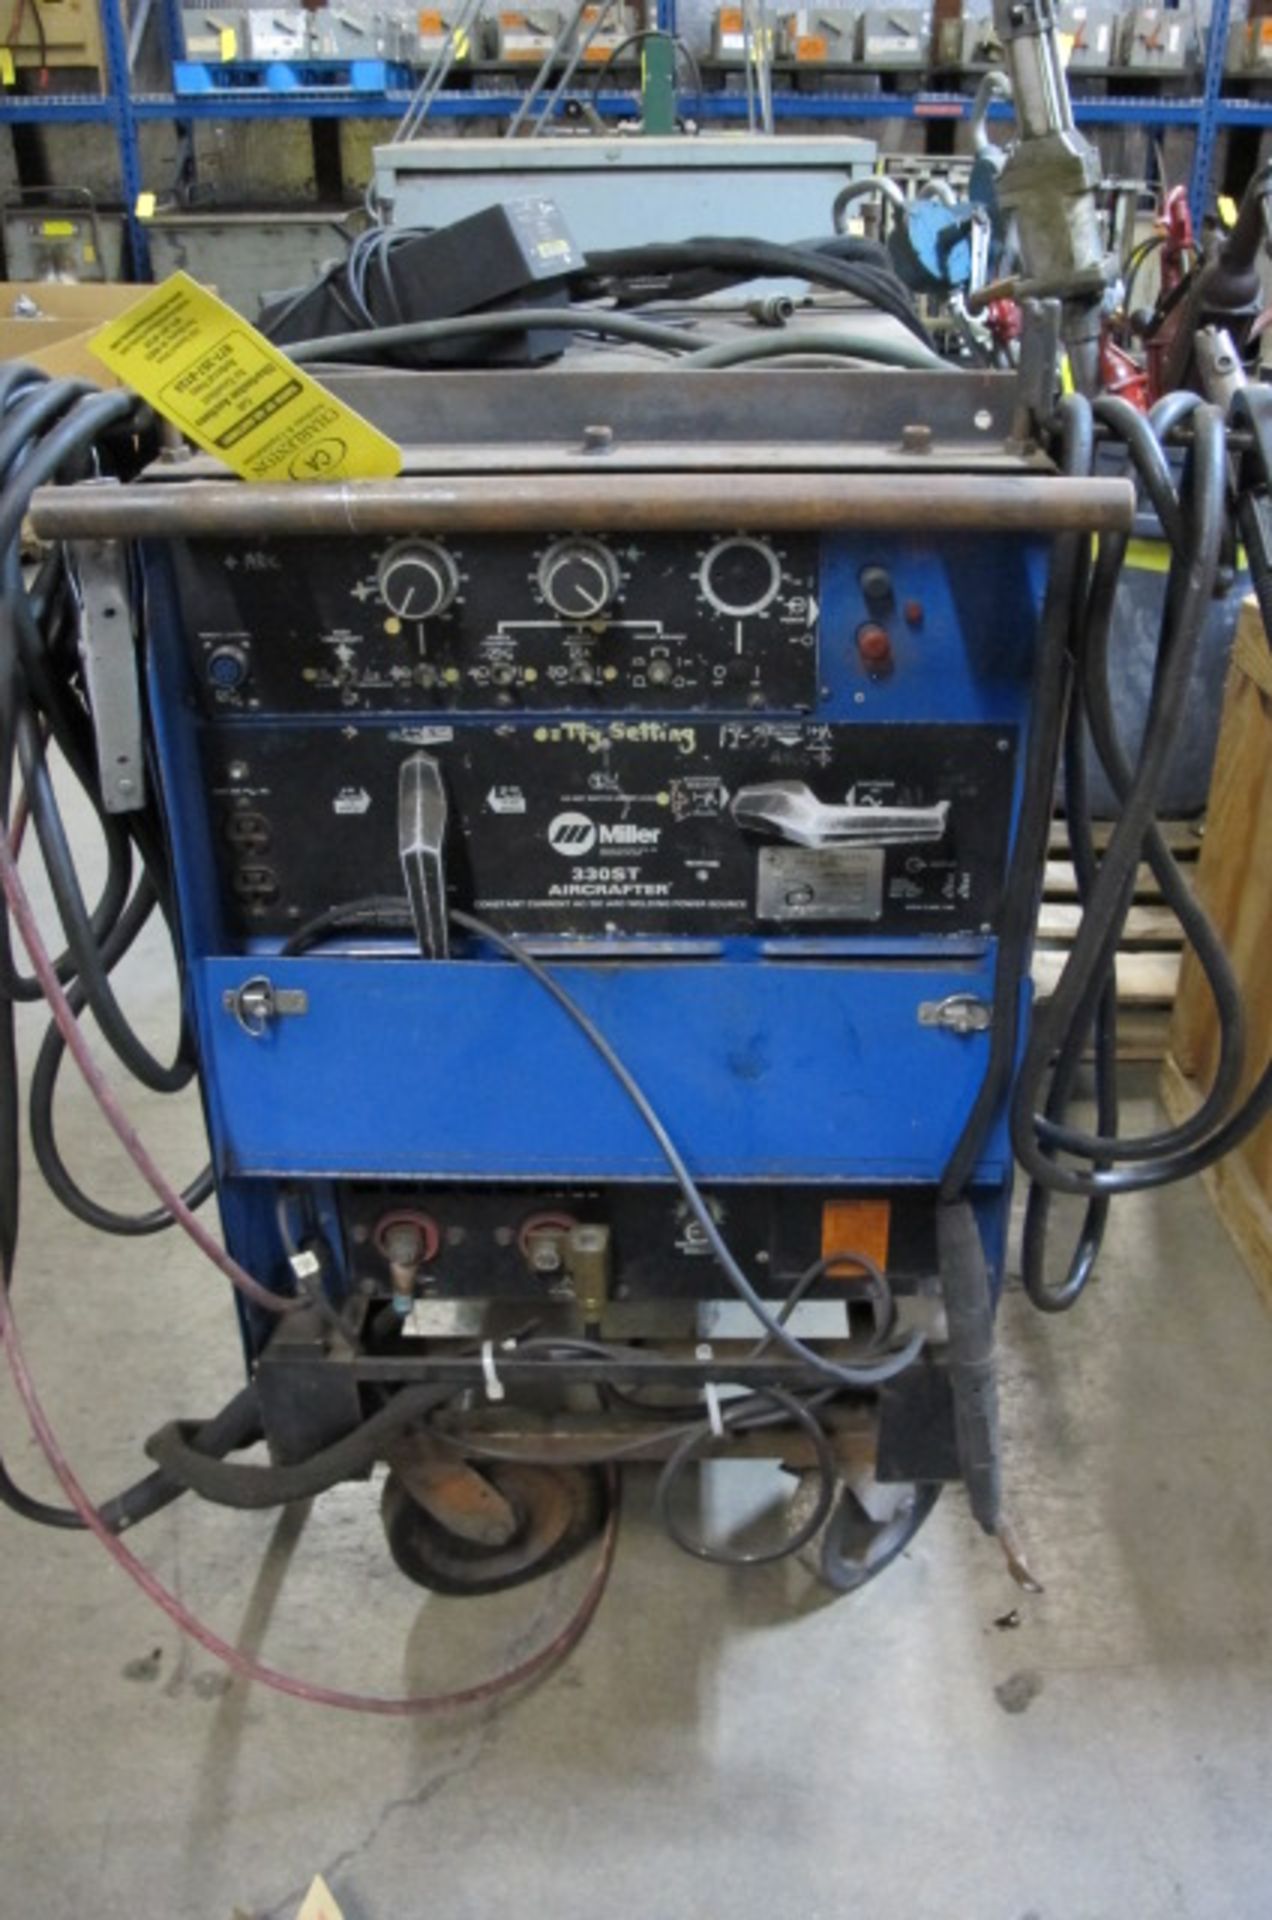 MILLER ARC WELDER; 330ST AIRCRAFTER PORTABLE 7648 OH 120, Lyons, Ohio 43523 - all Gaylord plastic